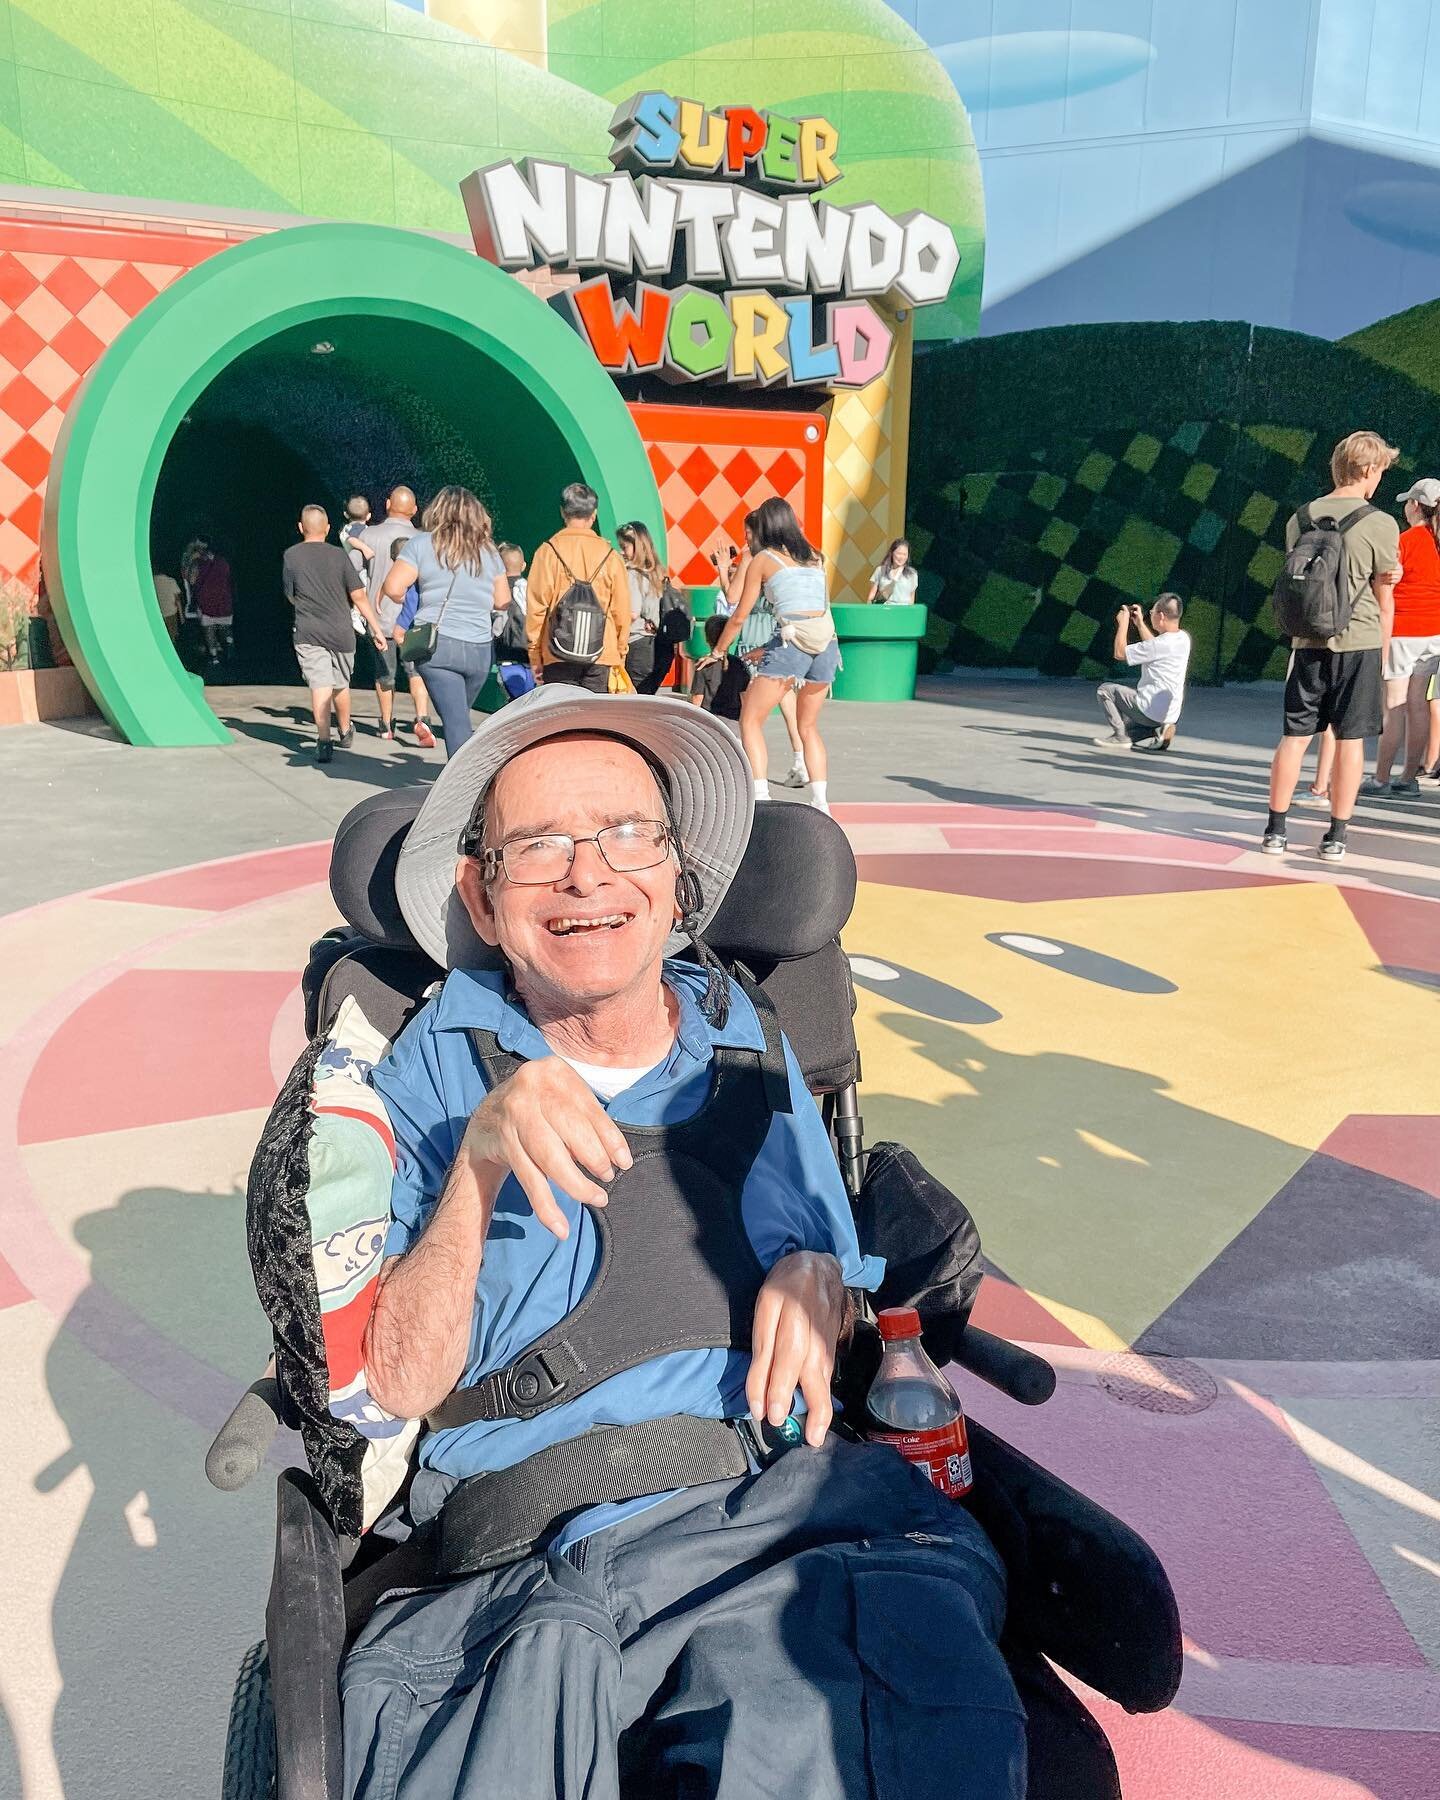 Chris has been a resident at Hinchee since 1981! Some of his favorite things are his family, cheeseburgers with a Coke, Disneyland, Dodger games and anything that allows him to be social.  His infectious smile and warm personality is loved by all!